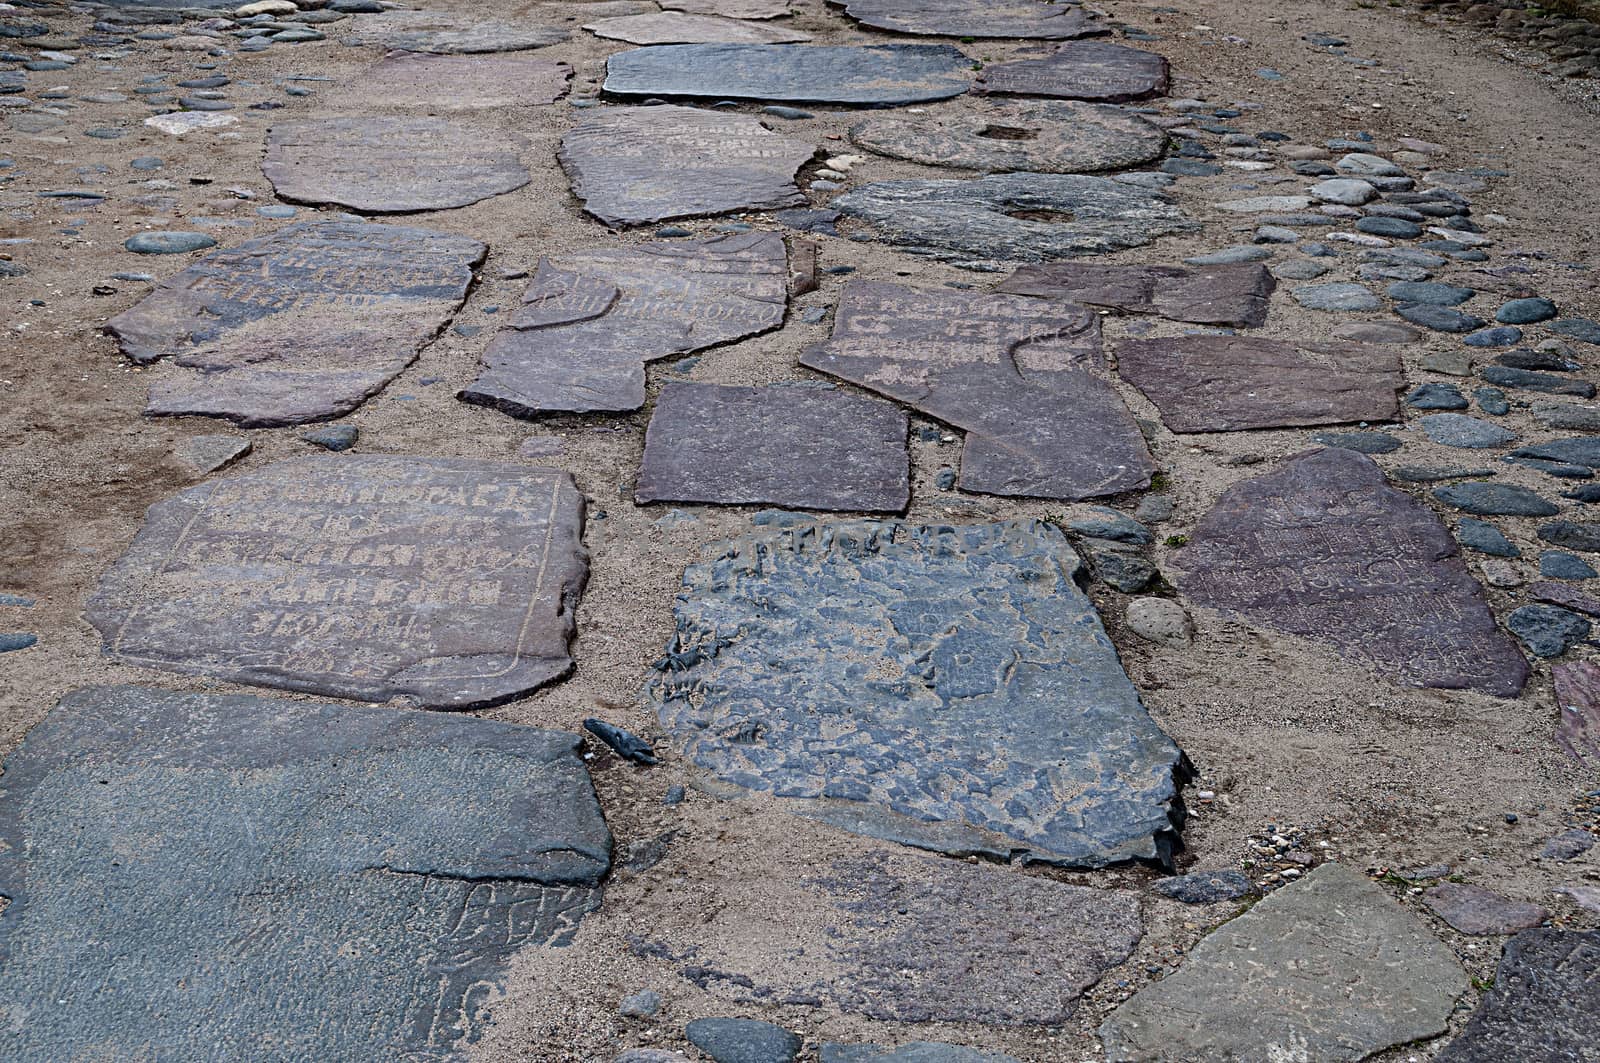 The path of stone slabs in the courtyard of Kirillo-Belozersky (St. Cyril-Belozersky) Monastery